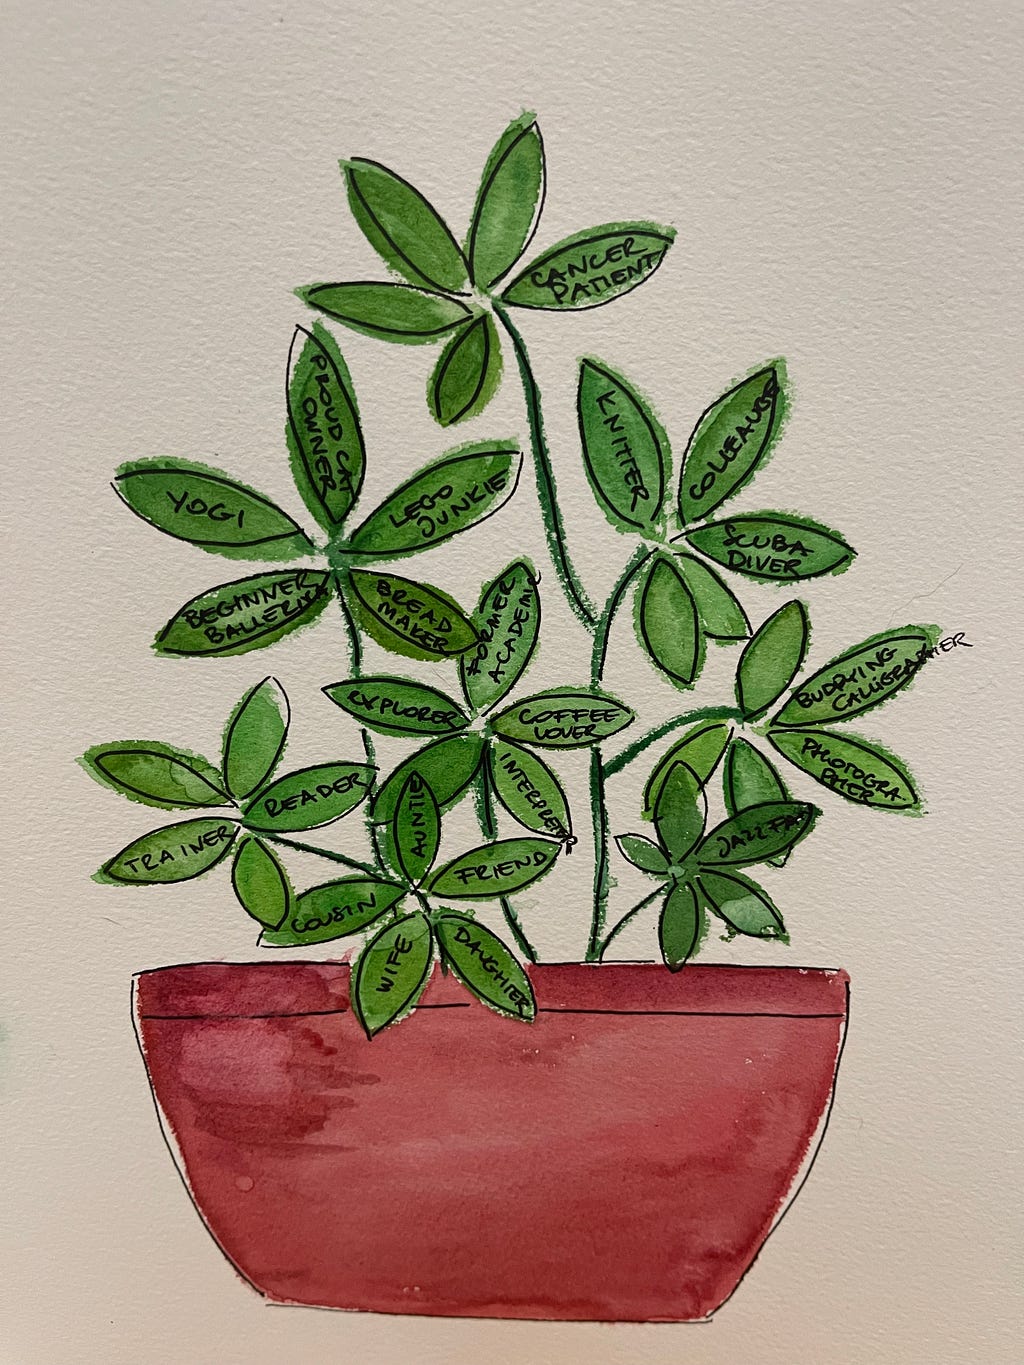 an watercolor painting of a plant with different roles written on the leaves